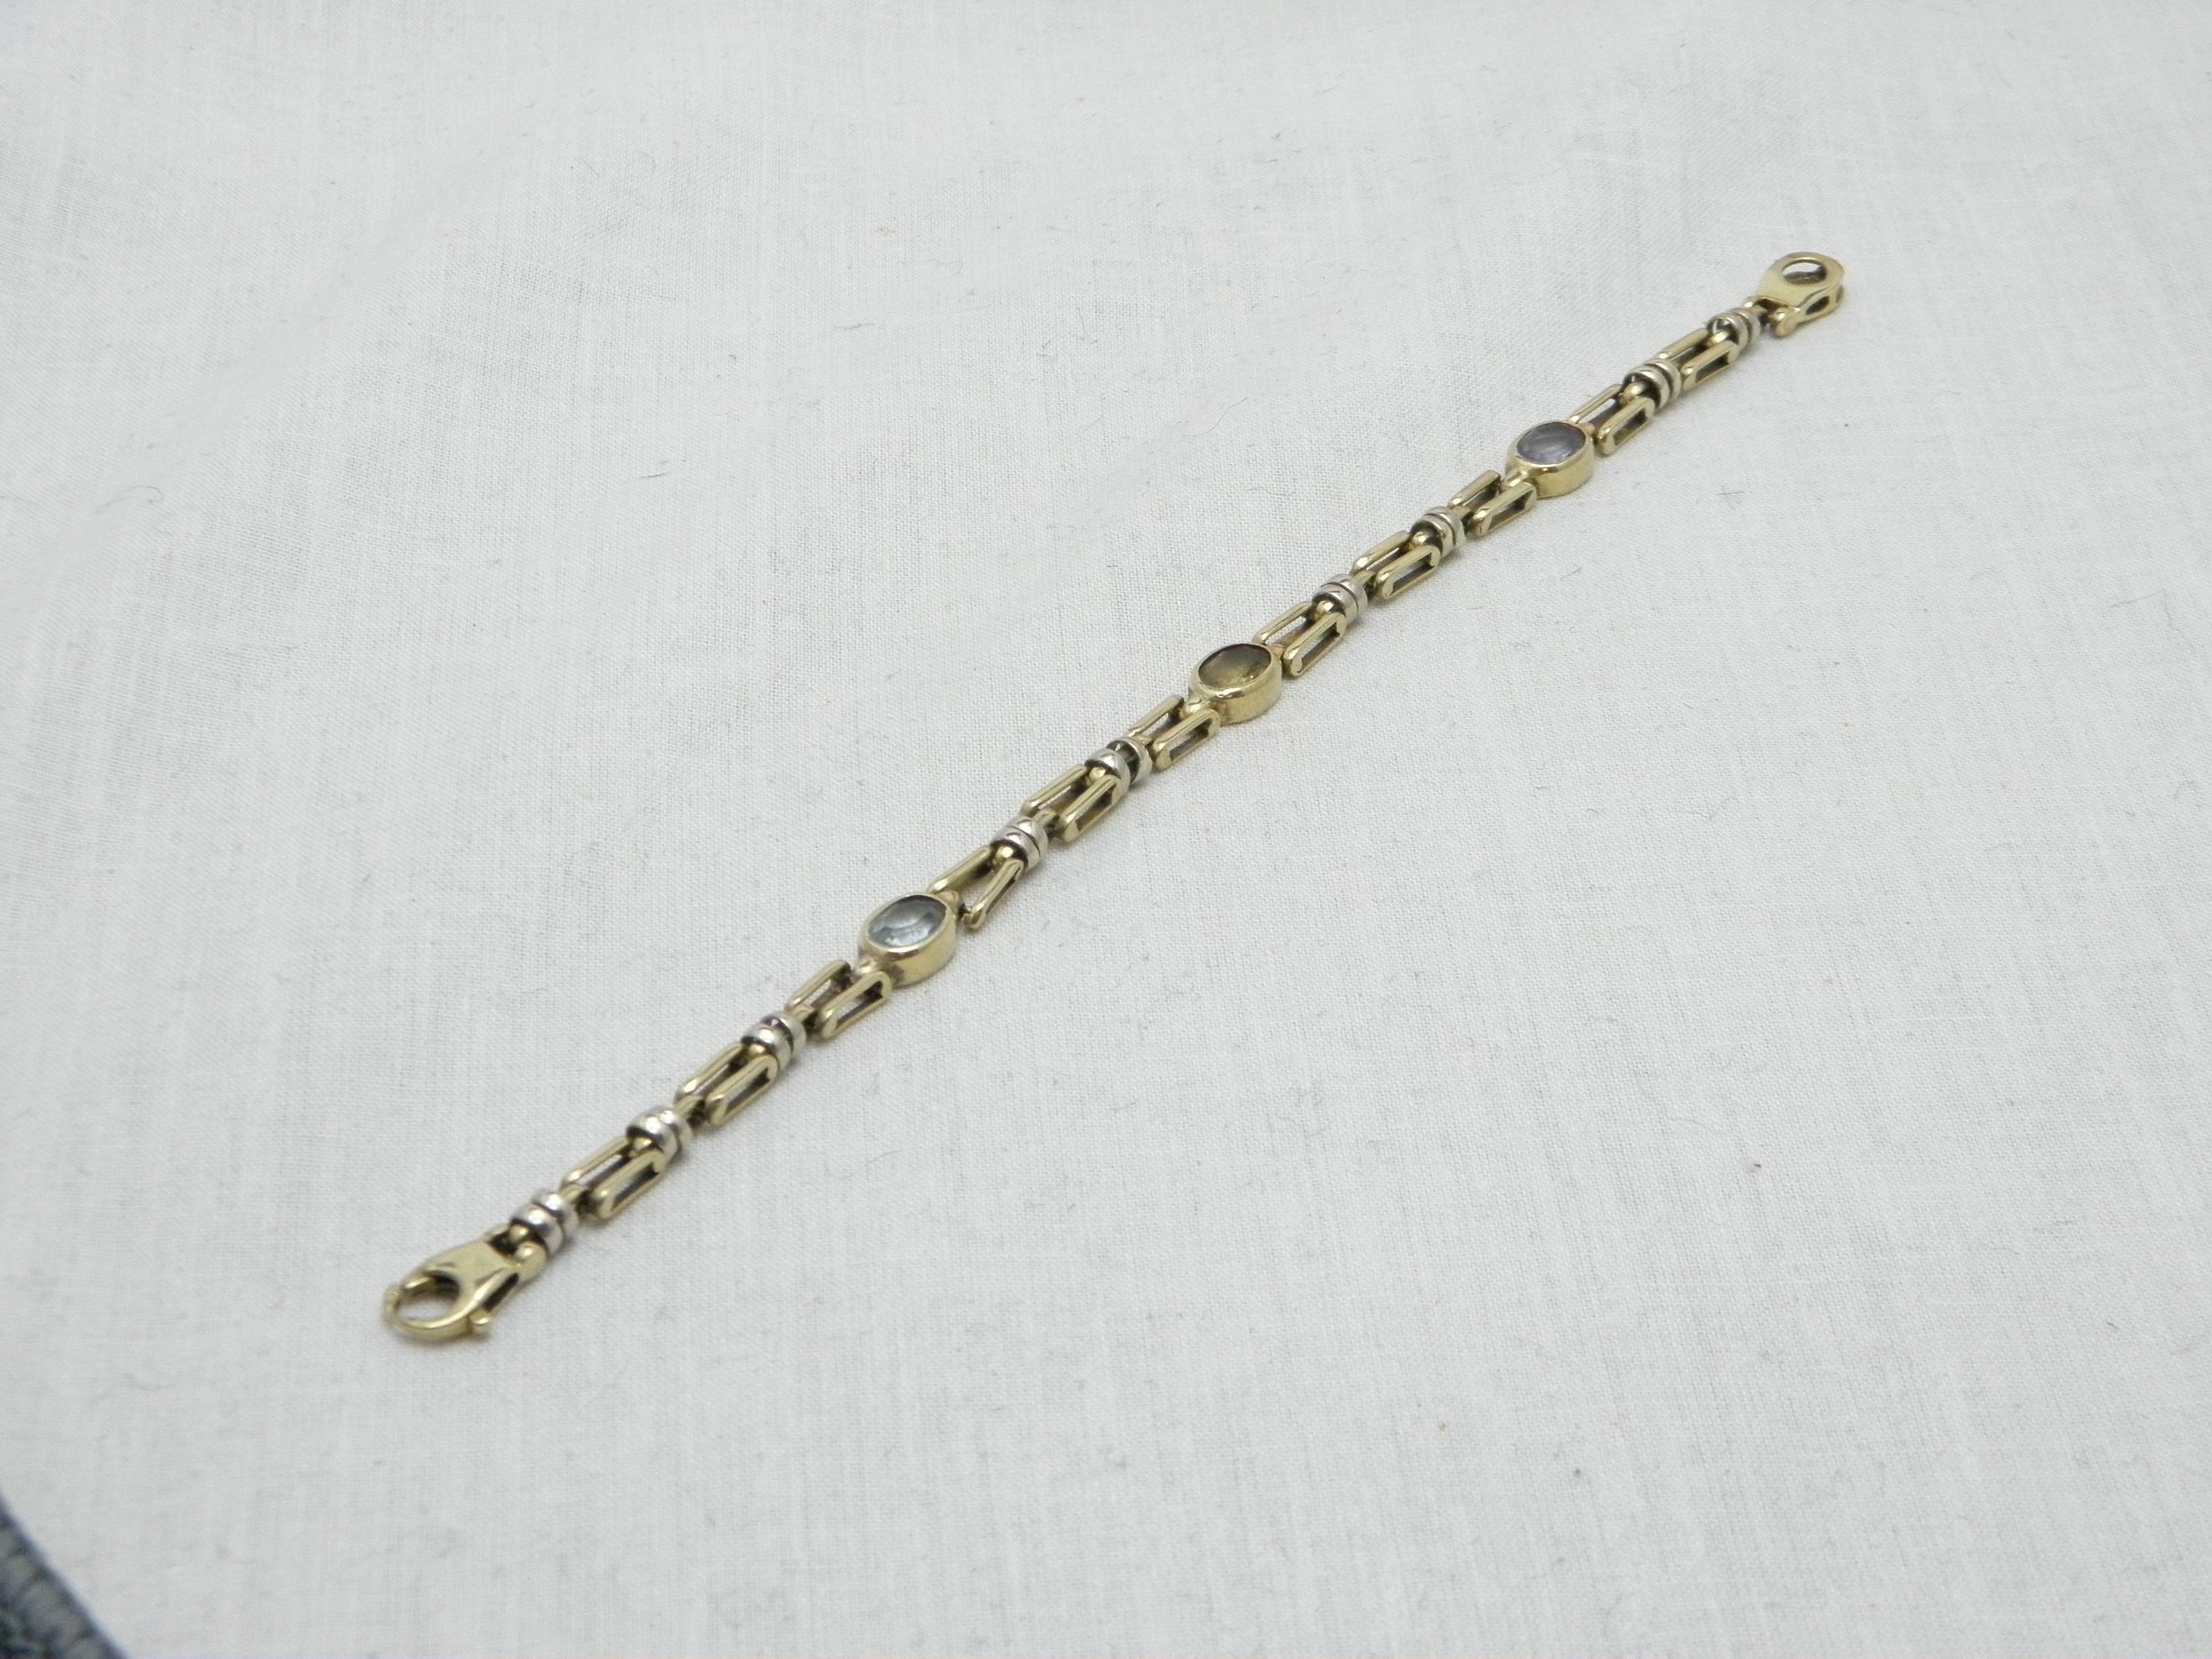 Vintage 14ct Gold Heavy Gemstone Bracelet 585 Purity Yellow White 13.3 In Good Condition For Sale In Camelford, GB